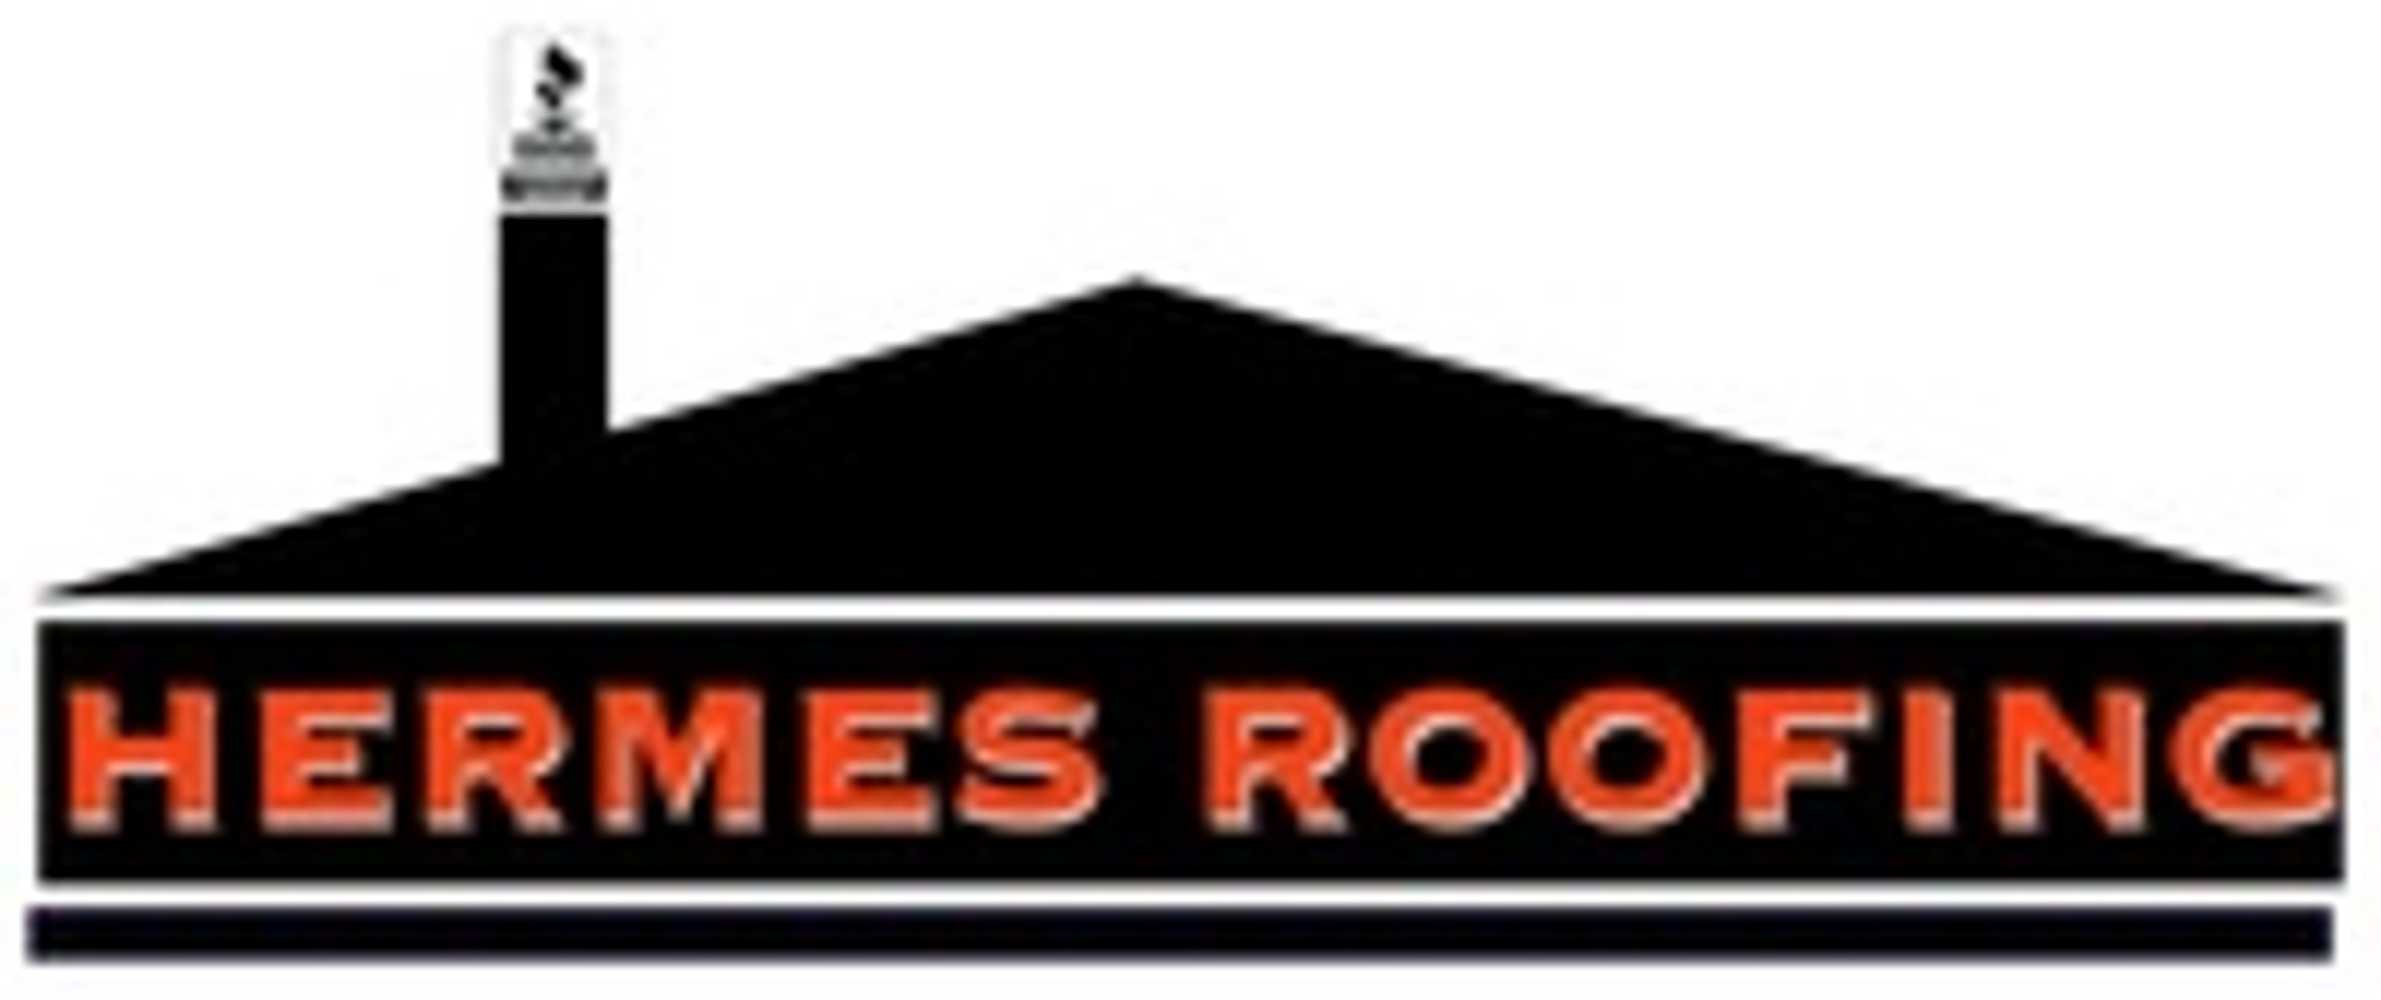 Photo(s) from Hermes Roofing